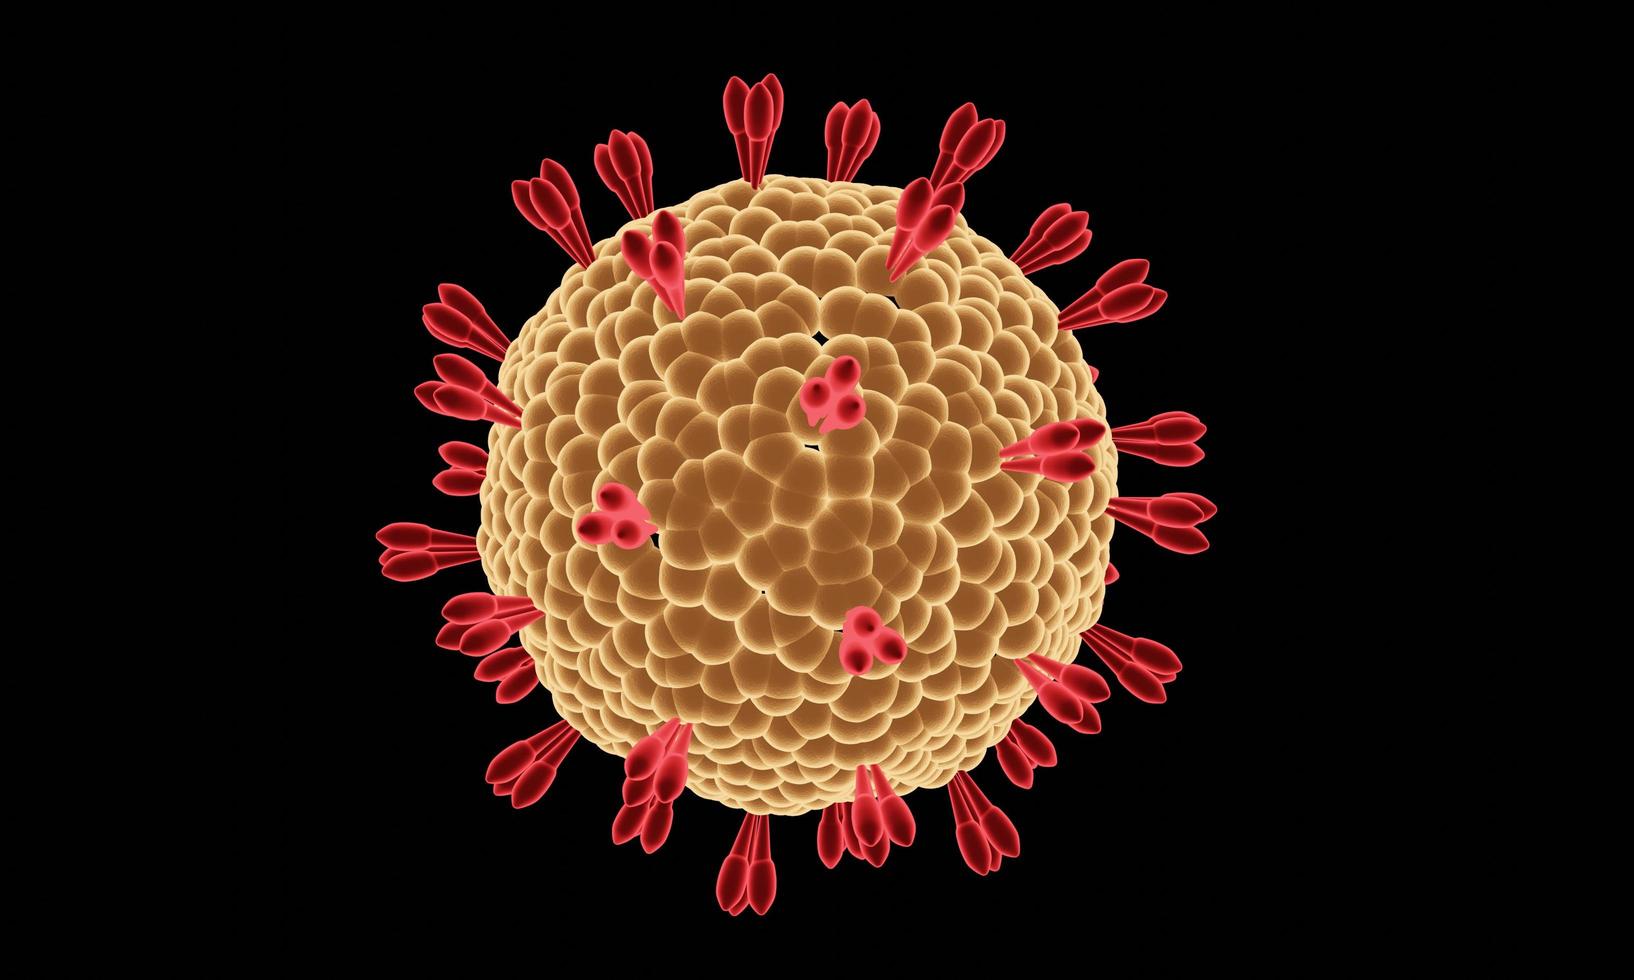 Covid-19 virus nCoV Concept. Abstract bacteria or virus cell in spherical shape with long antennas. Corona virus from  Wahan , China crisis concept. Pandemic or virus infection concept - 3D Rendering. photo